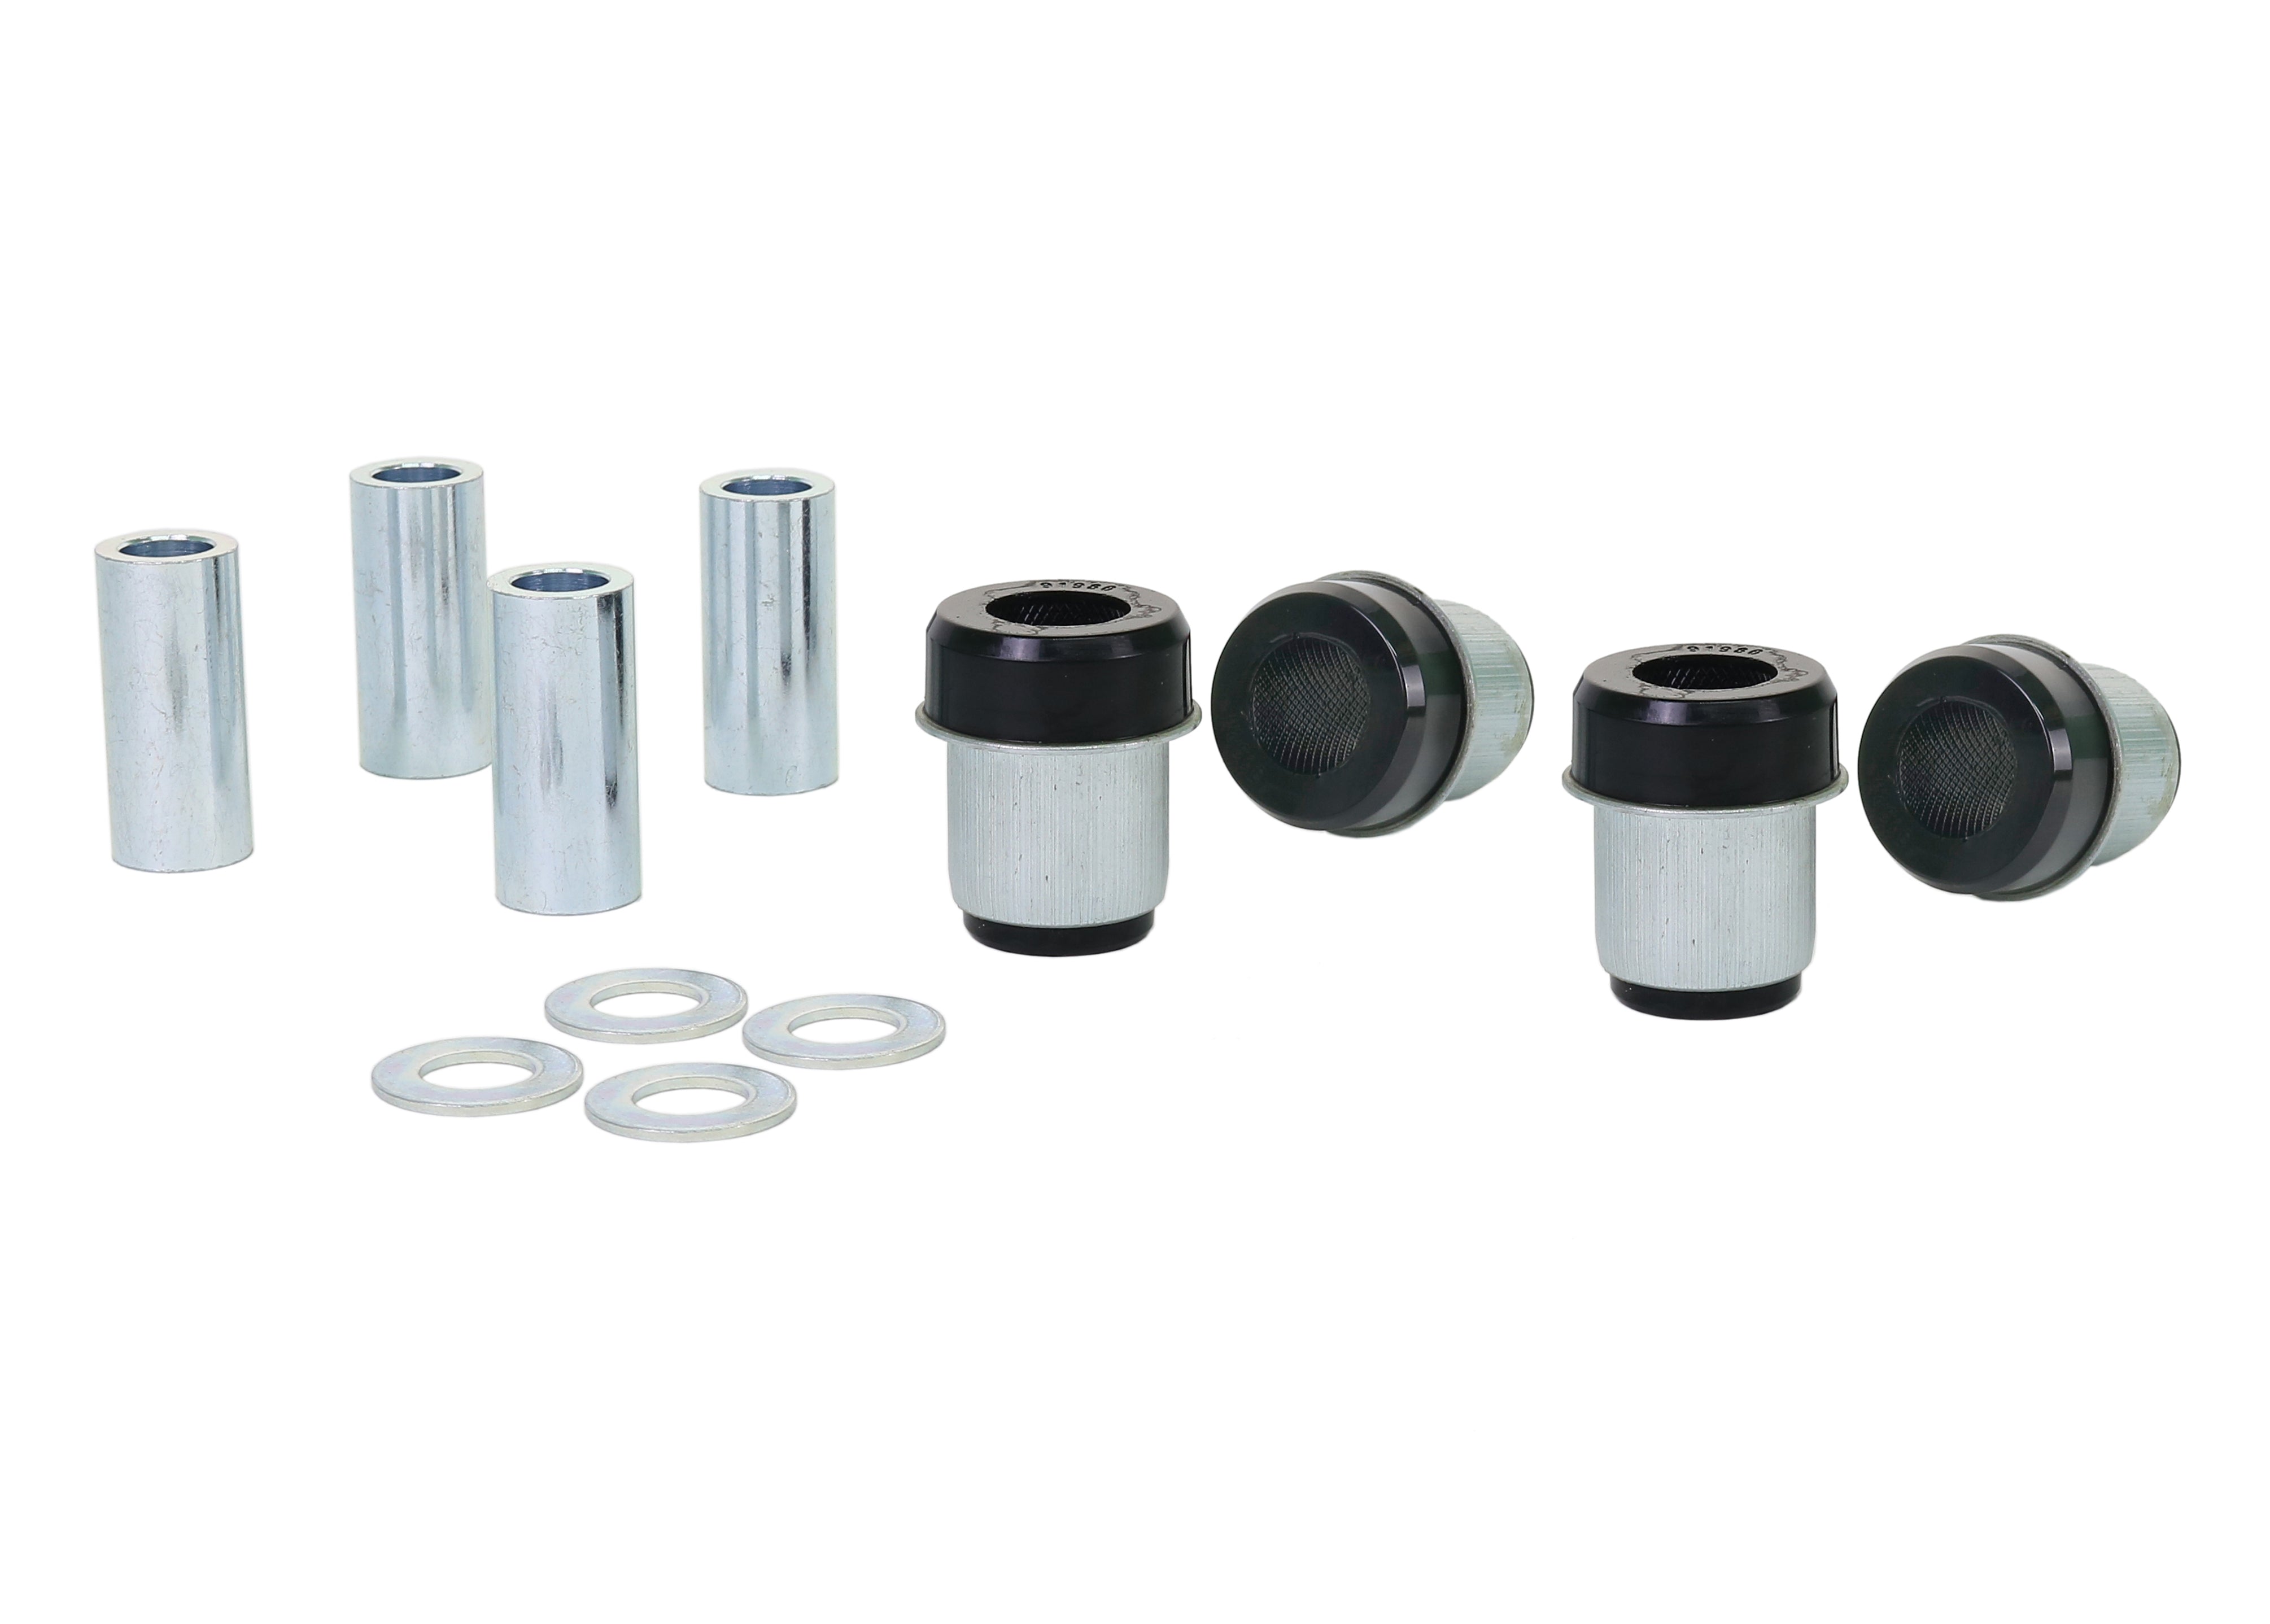 Front Control Arm Upper - Bushing Kit to Suit Ford Ranger PJ, PK and Mazda BT-50 UN 2wd/4wd (W53652)